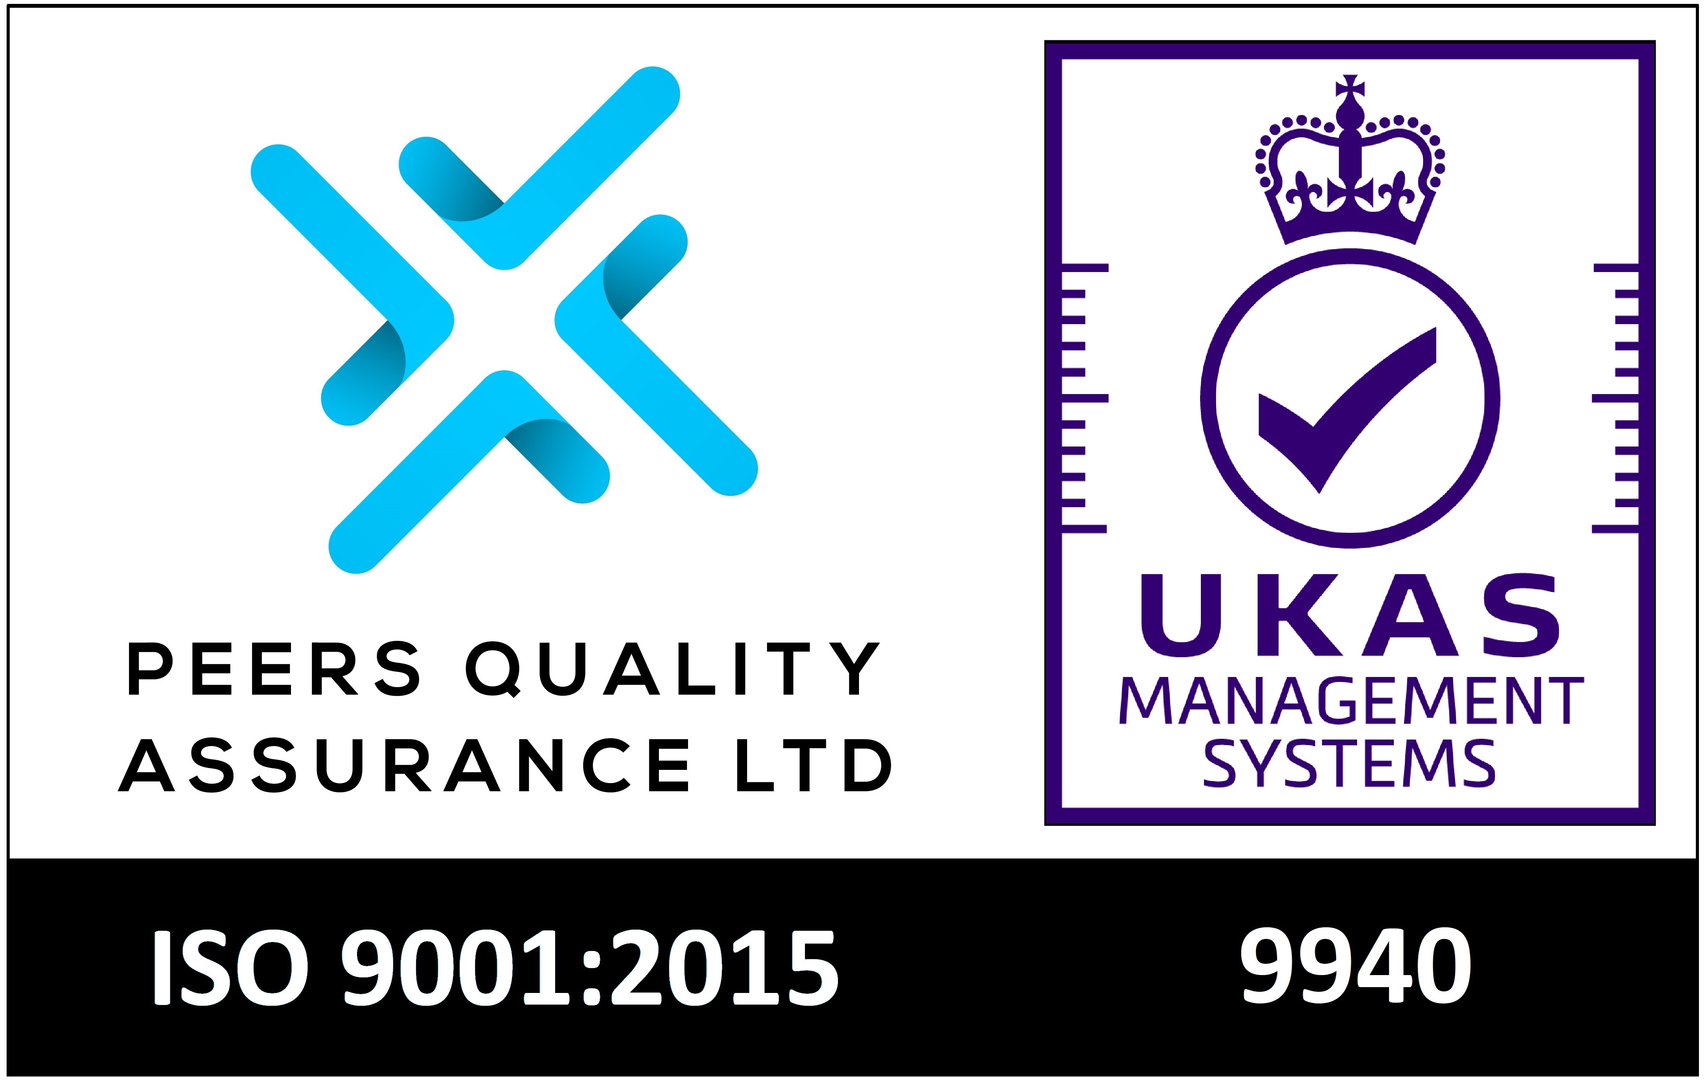 Happy to announce re-accreditation to ISO 9001:2015